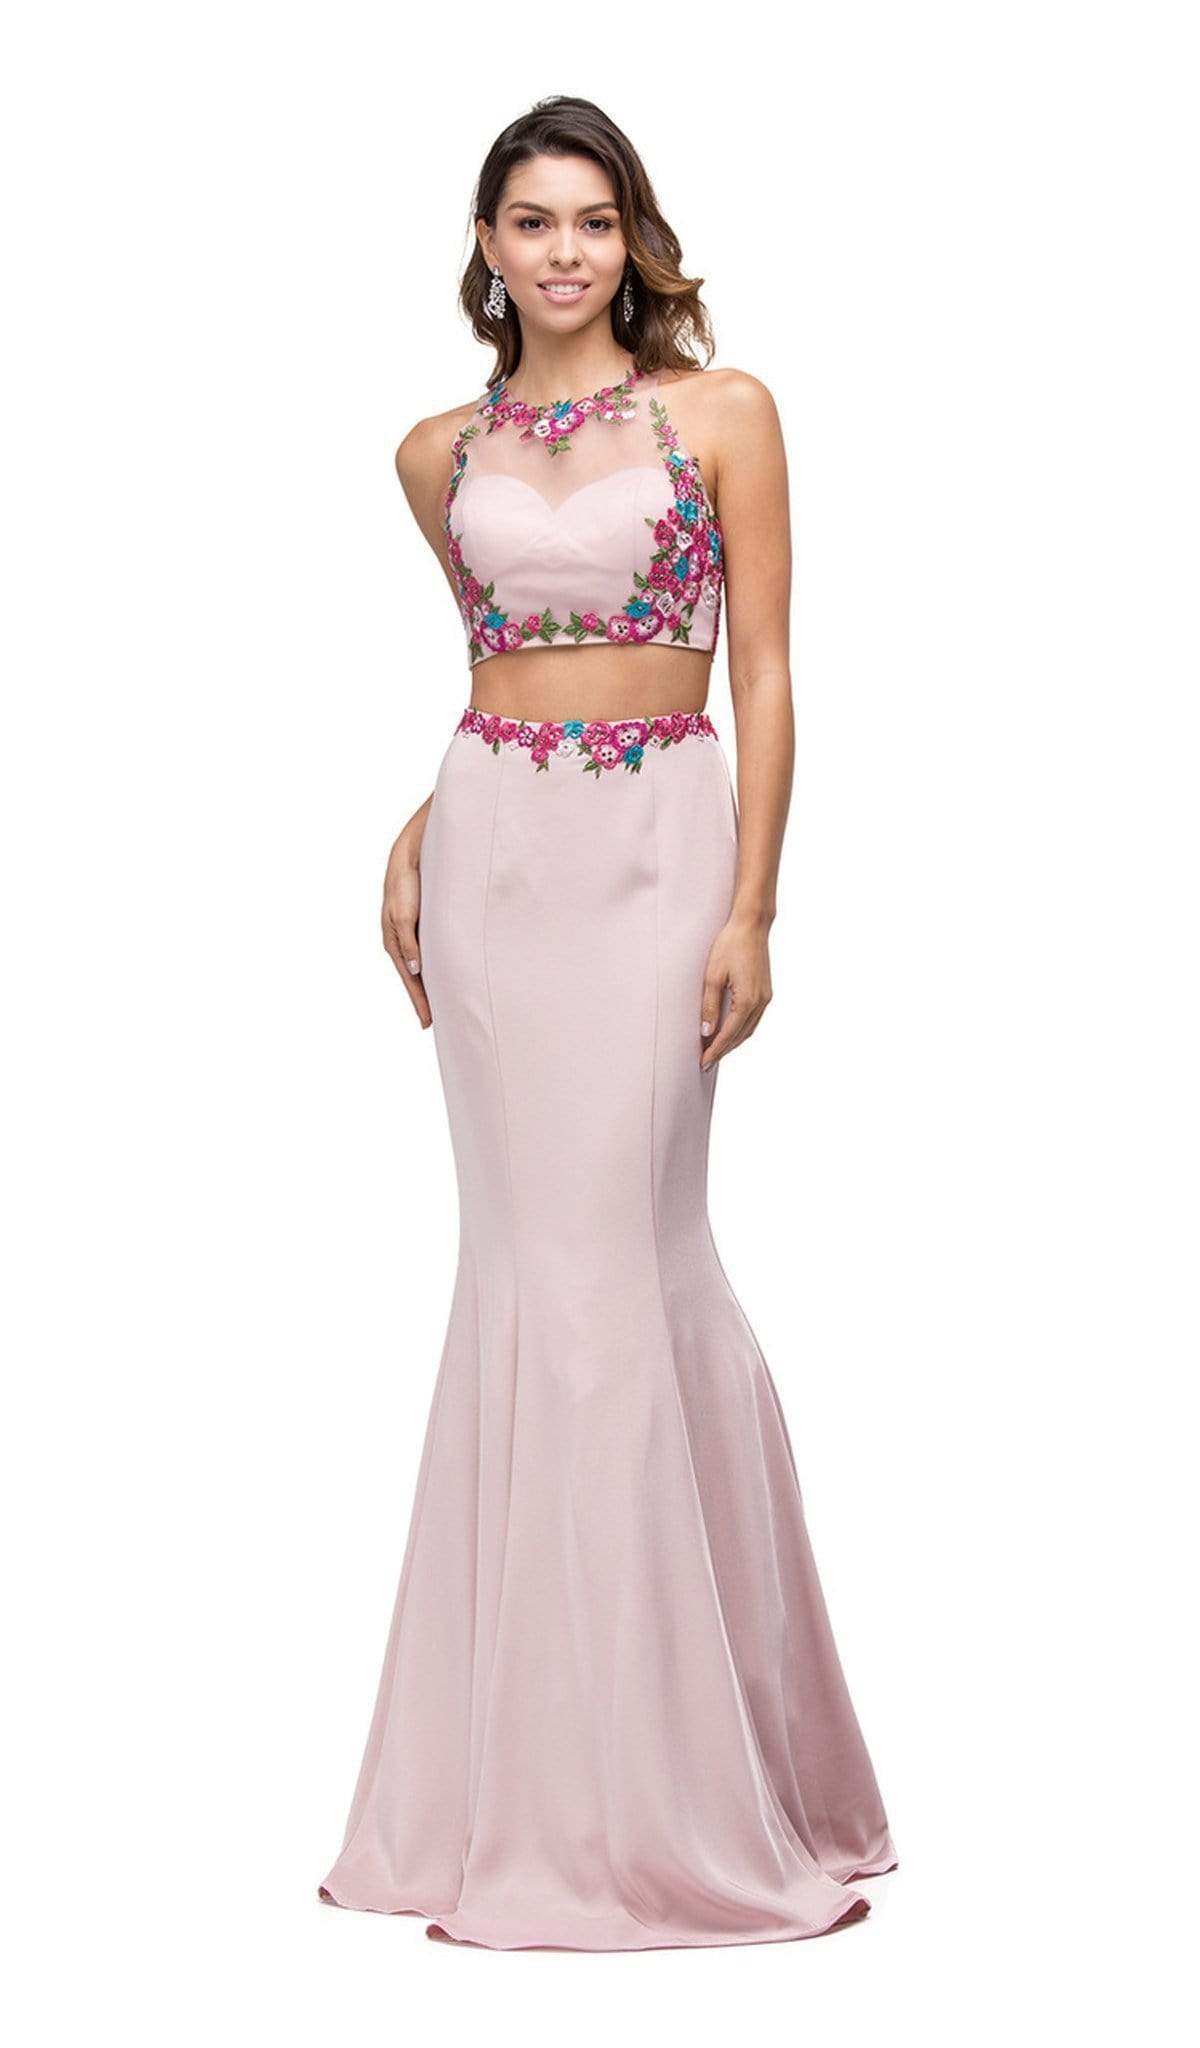 Dancing Queen - 9778 Floral Embroidered Two-piece Mermaid Prom Dress Prom Dresses XS / Blush/Fuchsia